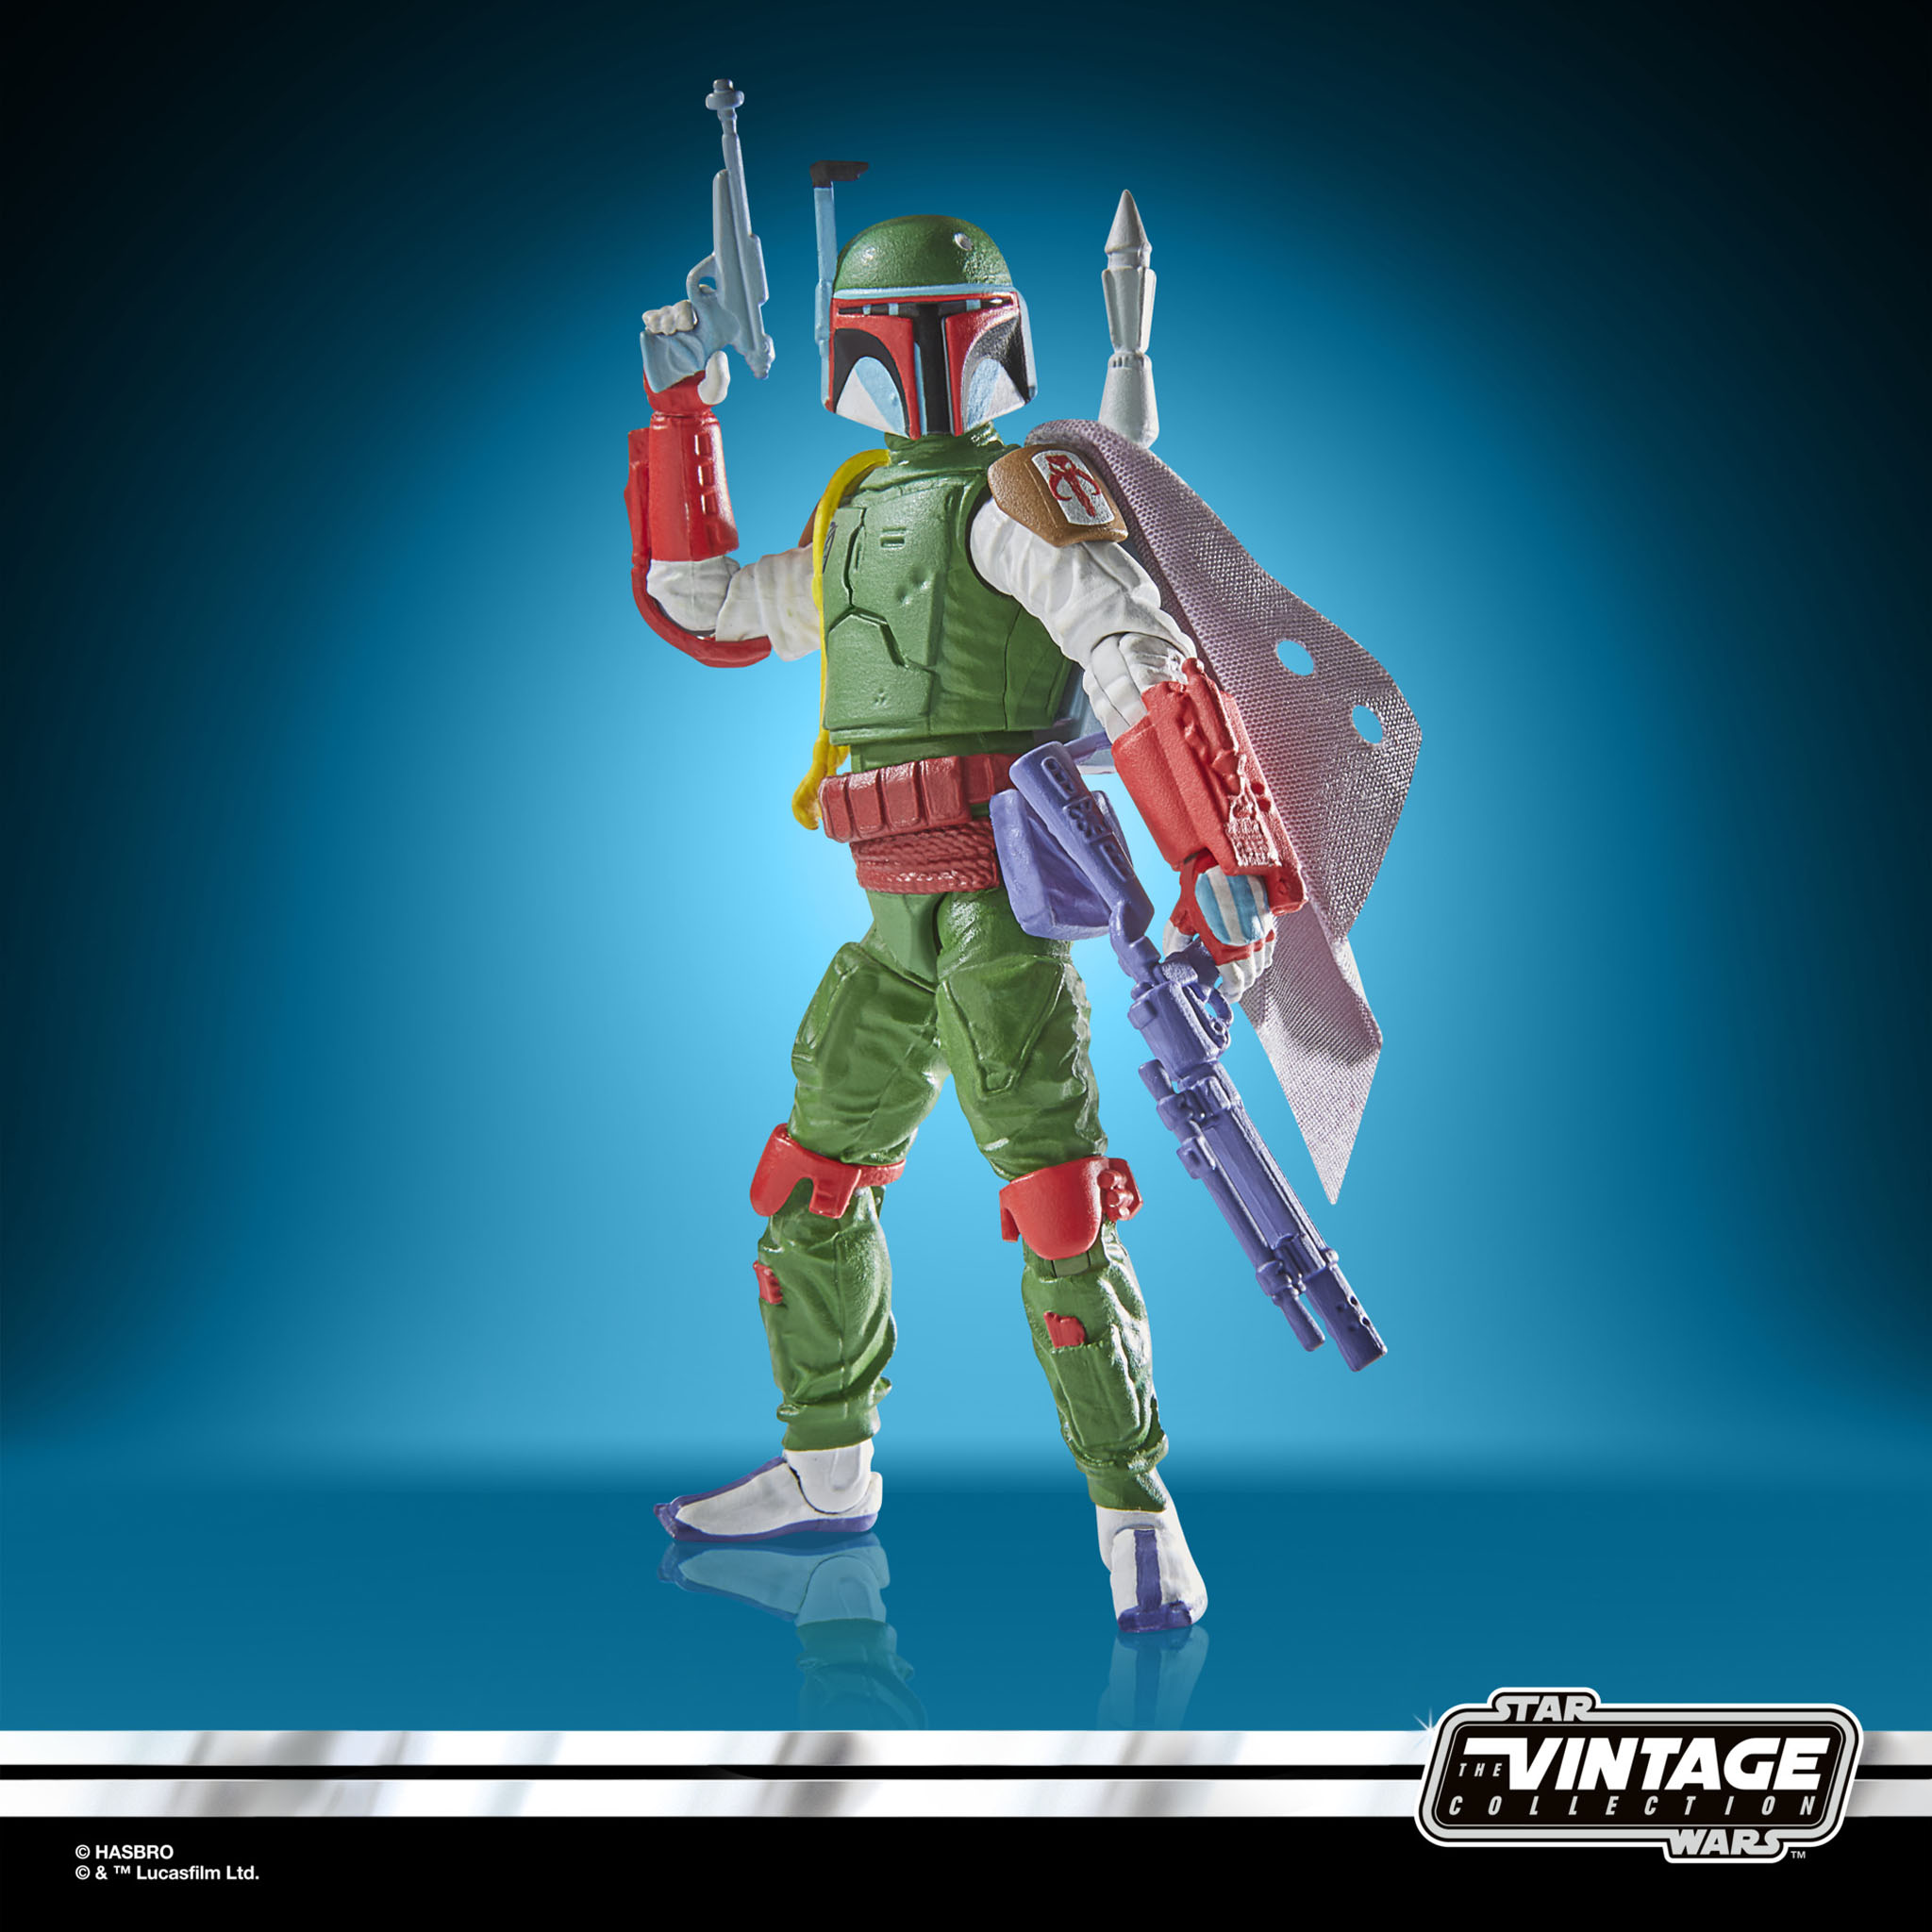 Star Wars Bring Home the Galaxy: New Vintage Collection and Black Series reveals